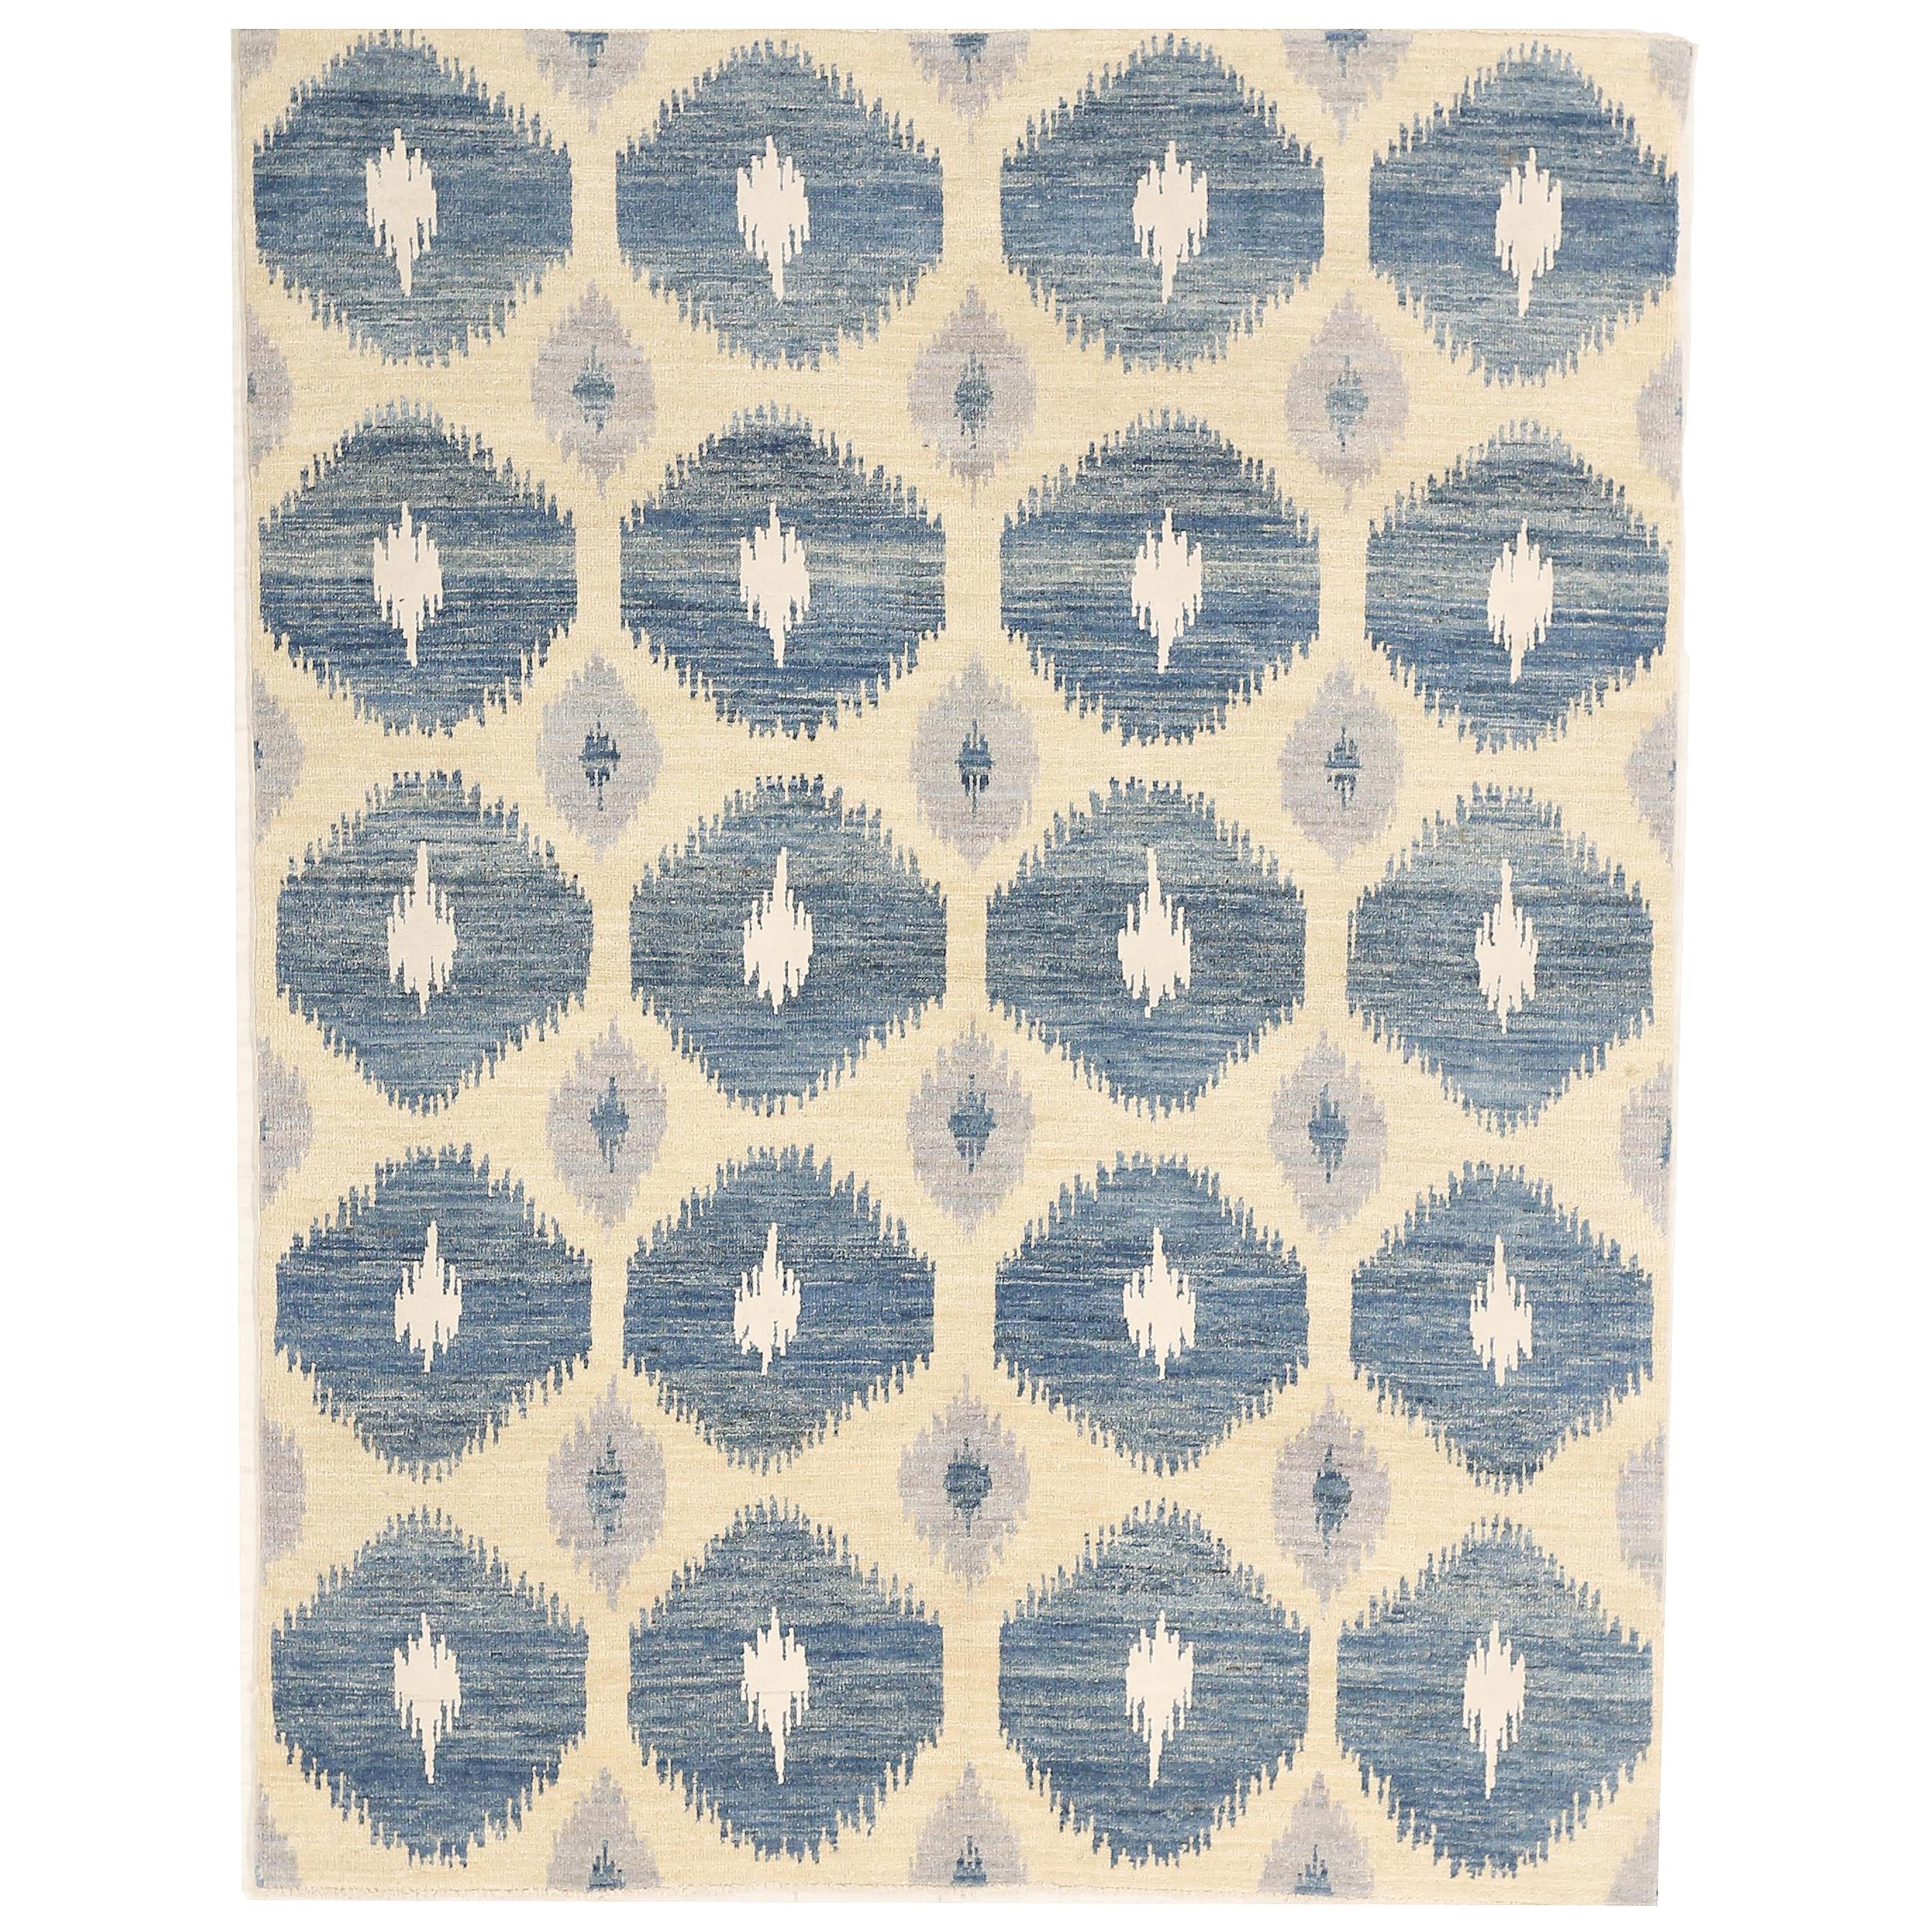 Contemporary Afghan Ikat Rug with White and Navy Hexagon Patterns